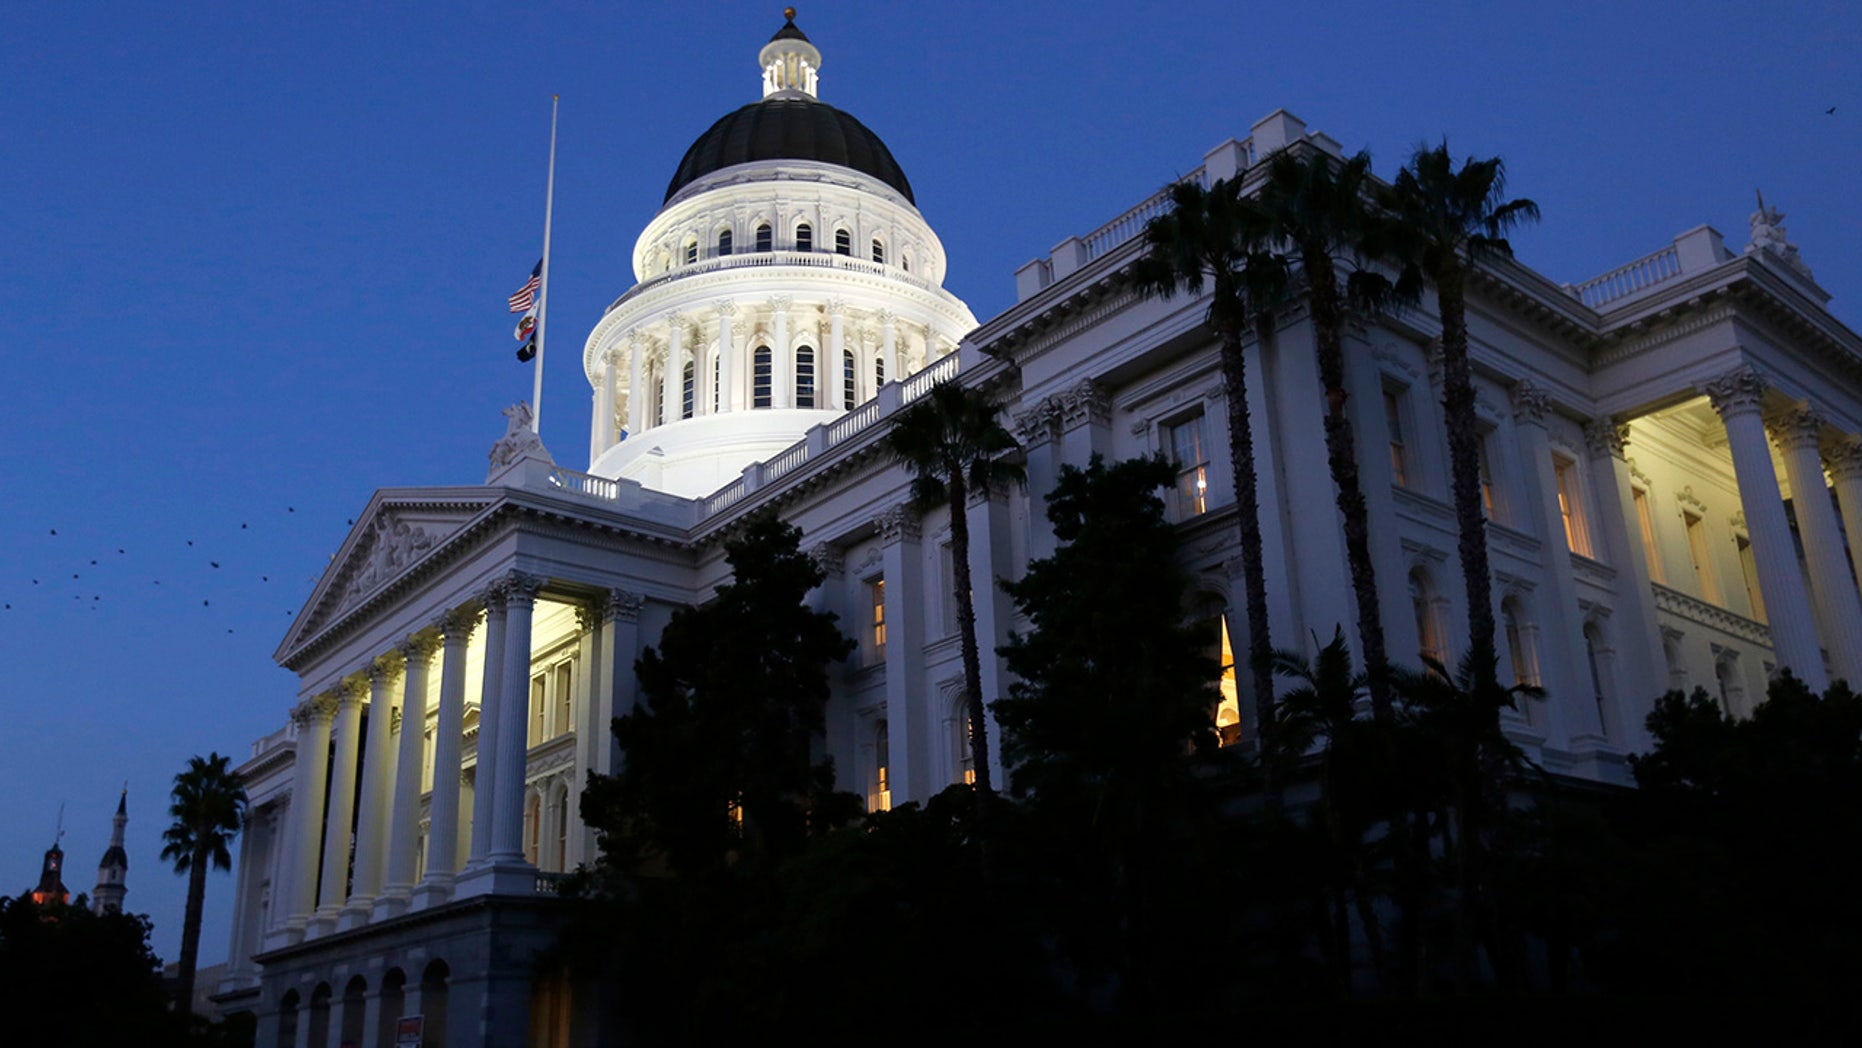 Capitol Dome lights shine as lawmakers work all night Friday, August 31, 2018, in Sacramento, California. Friday is the last day that California lawmakers consider bills before they are postponed after the November elections. (AP Photo / Rich Pedroncelli)